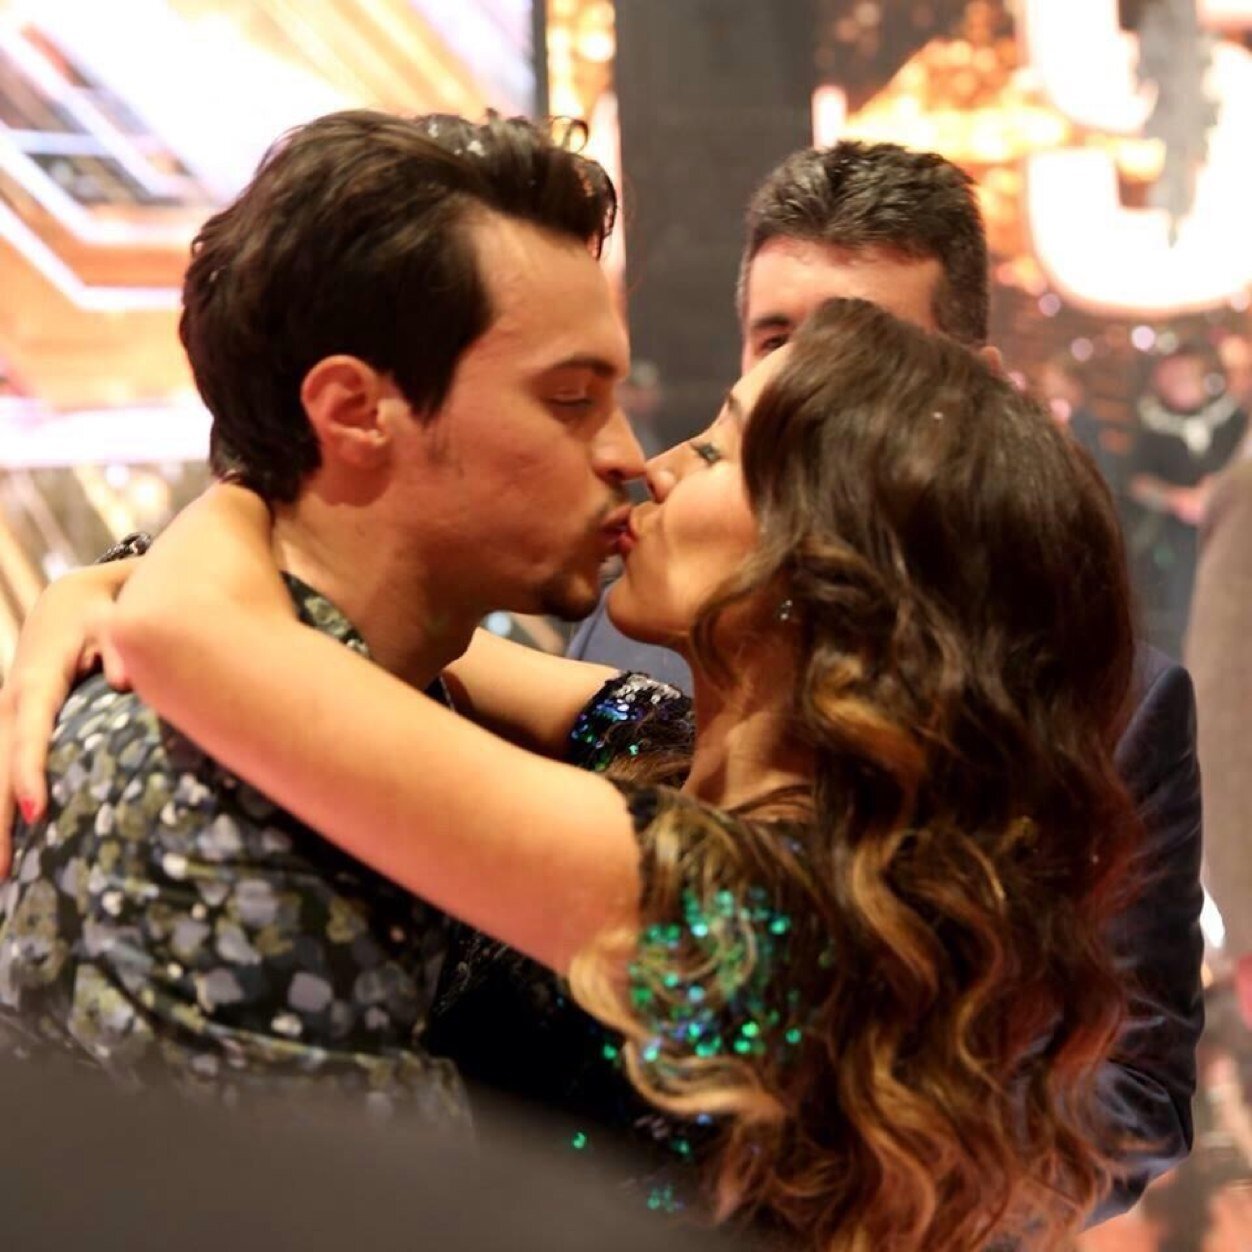 Alex and sierra are the two most amazing people in the world, their love gives me a reason to smile #KinseyDeatonForever We kiss so that would be weird..